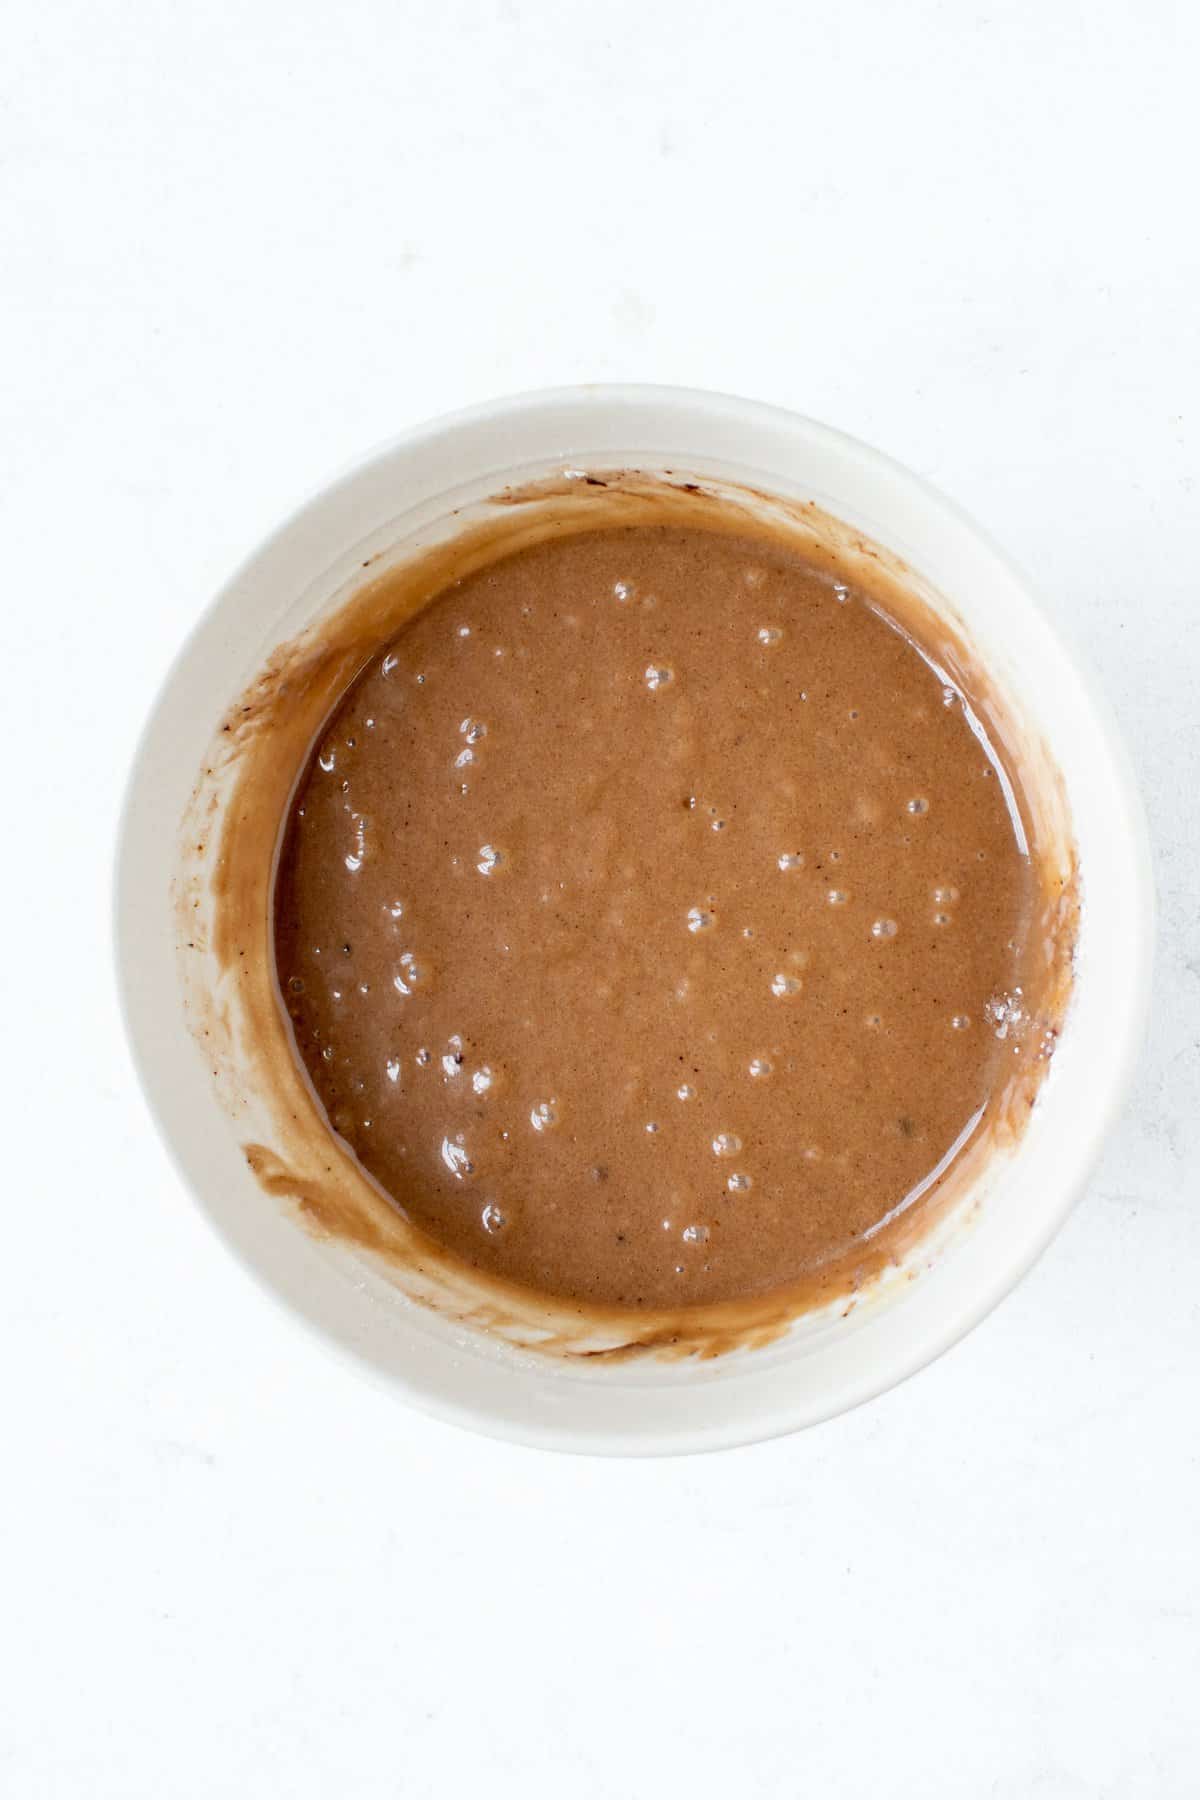 Chocolate cake batter in a large white bowl on white background. 